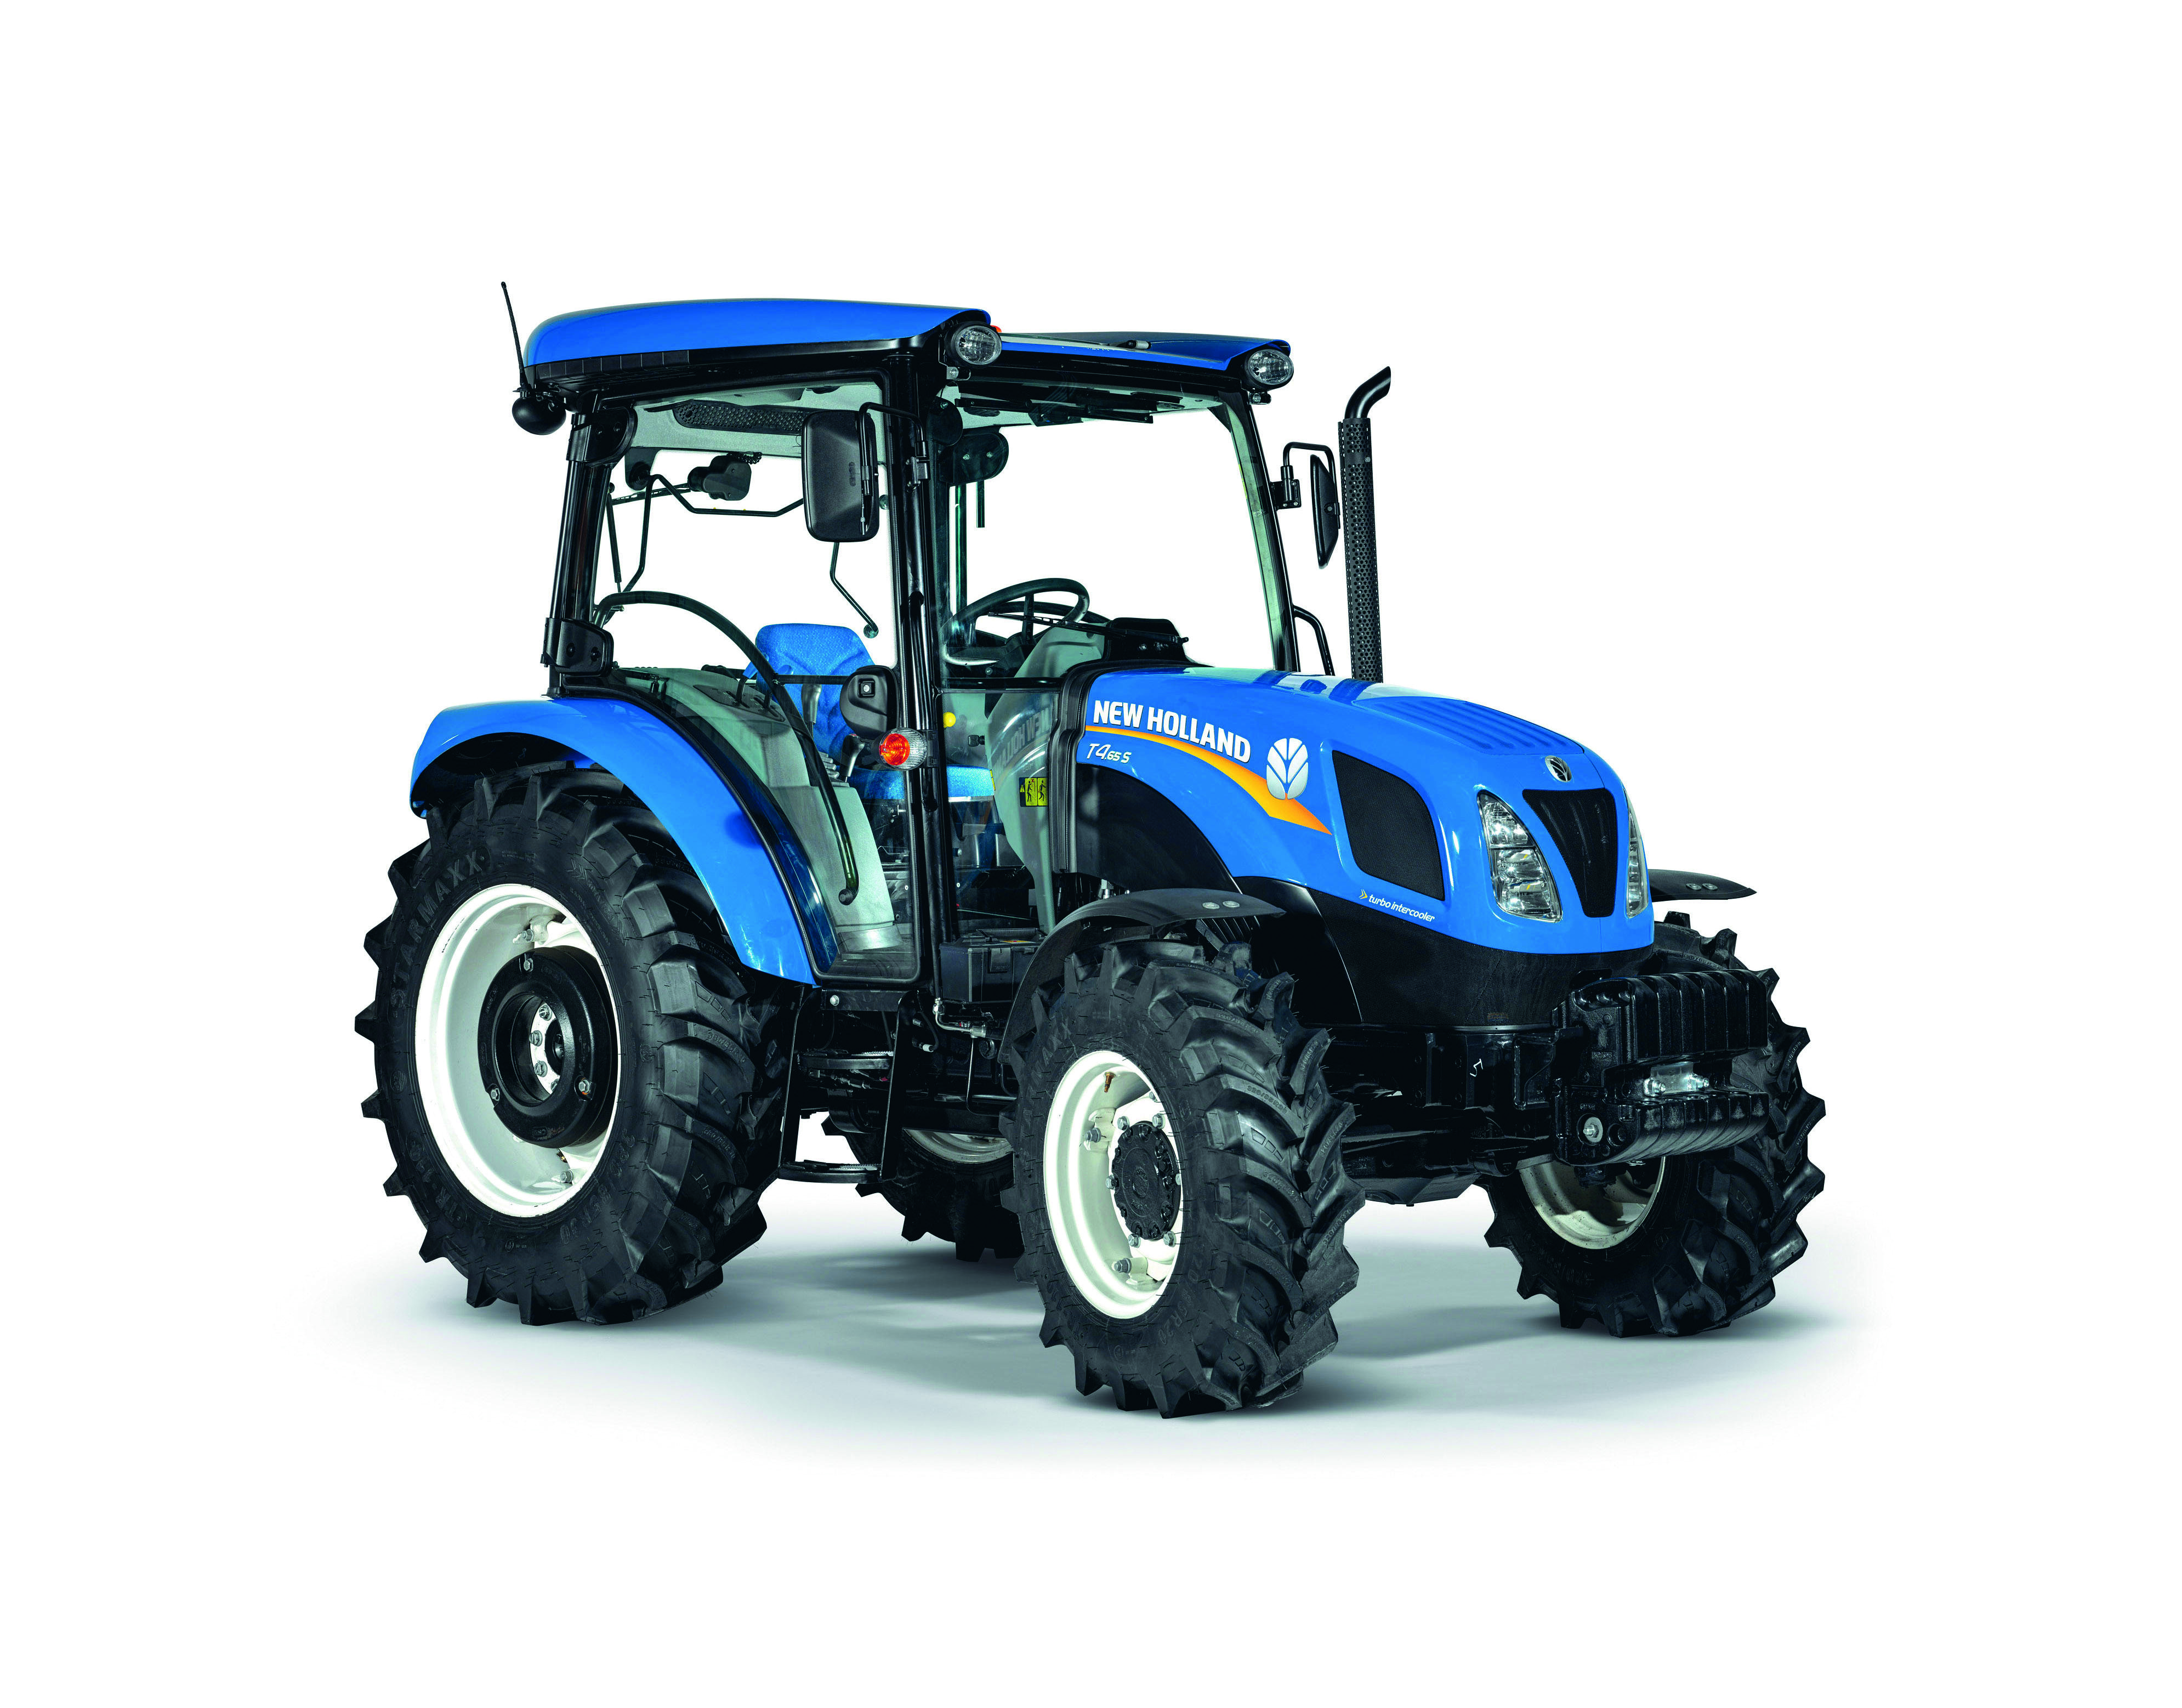 S tractor. New Holland TT4.80. New Holland t110. T6090 Нью Холланд. New Holland td5.110.